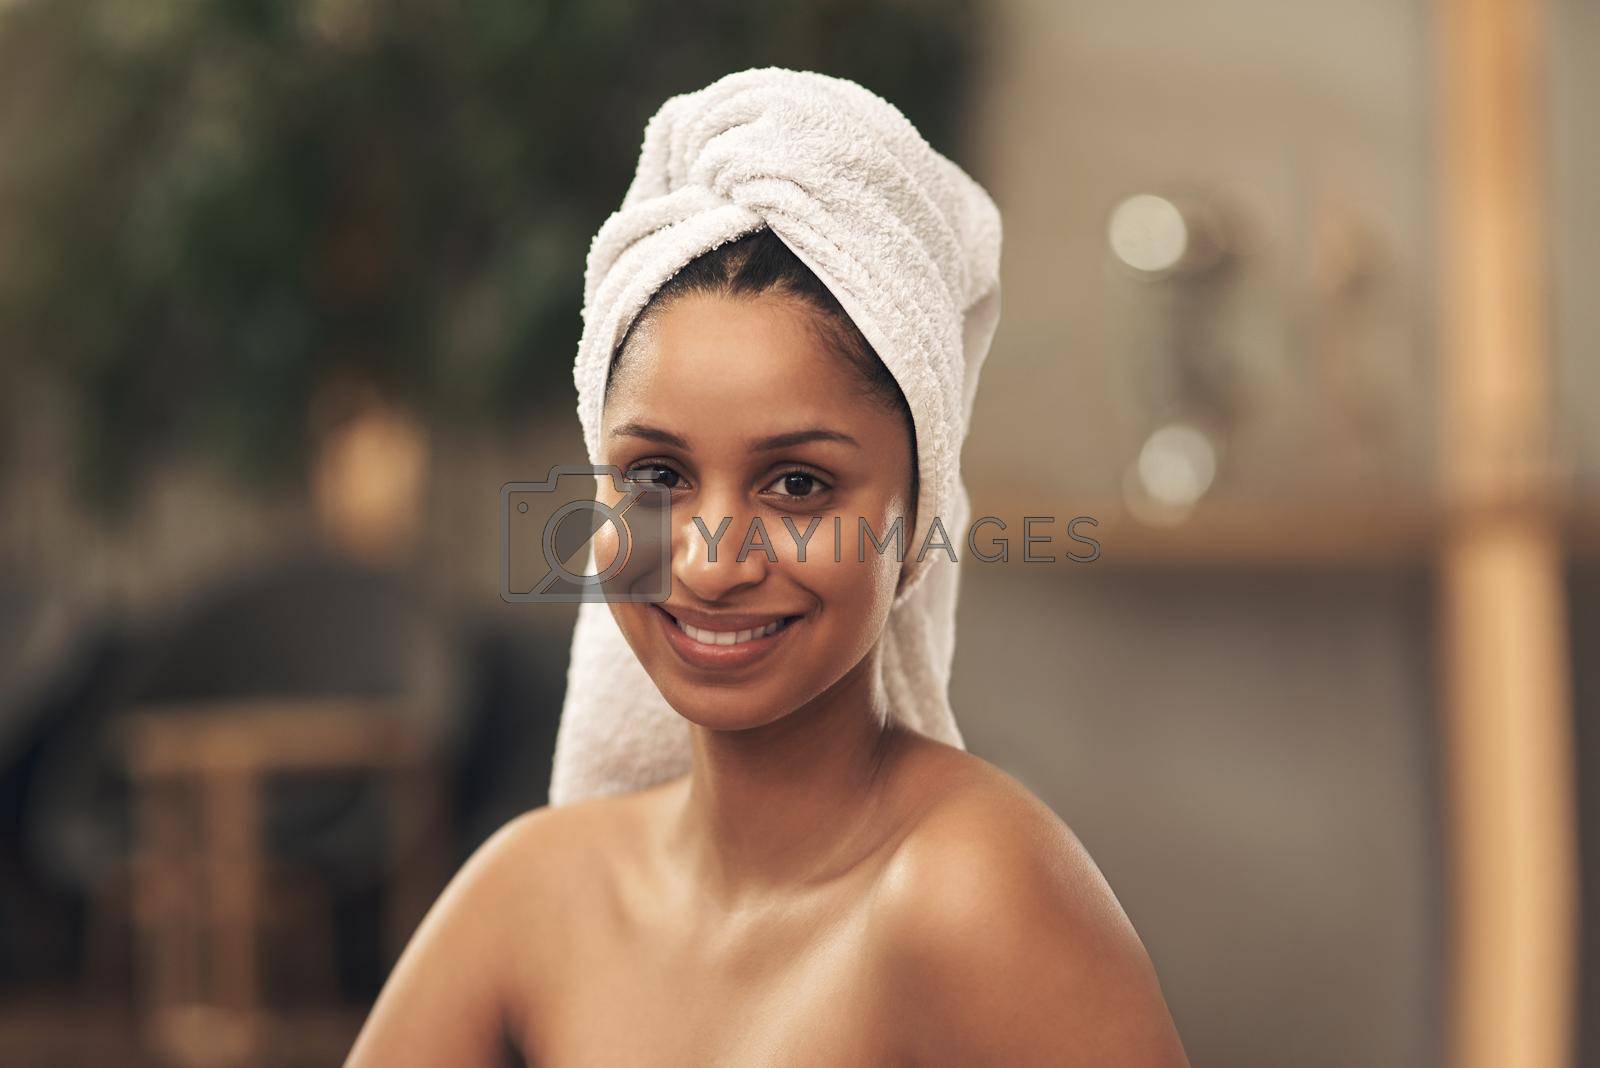 Shot of a woman wearing a towel around her head while enjoying a spa day.